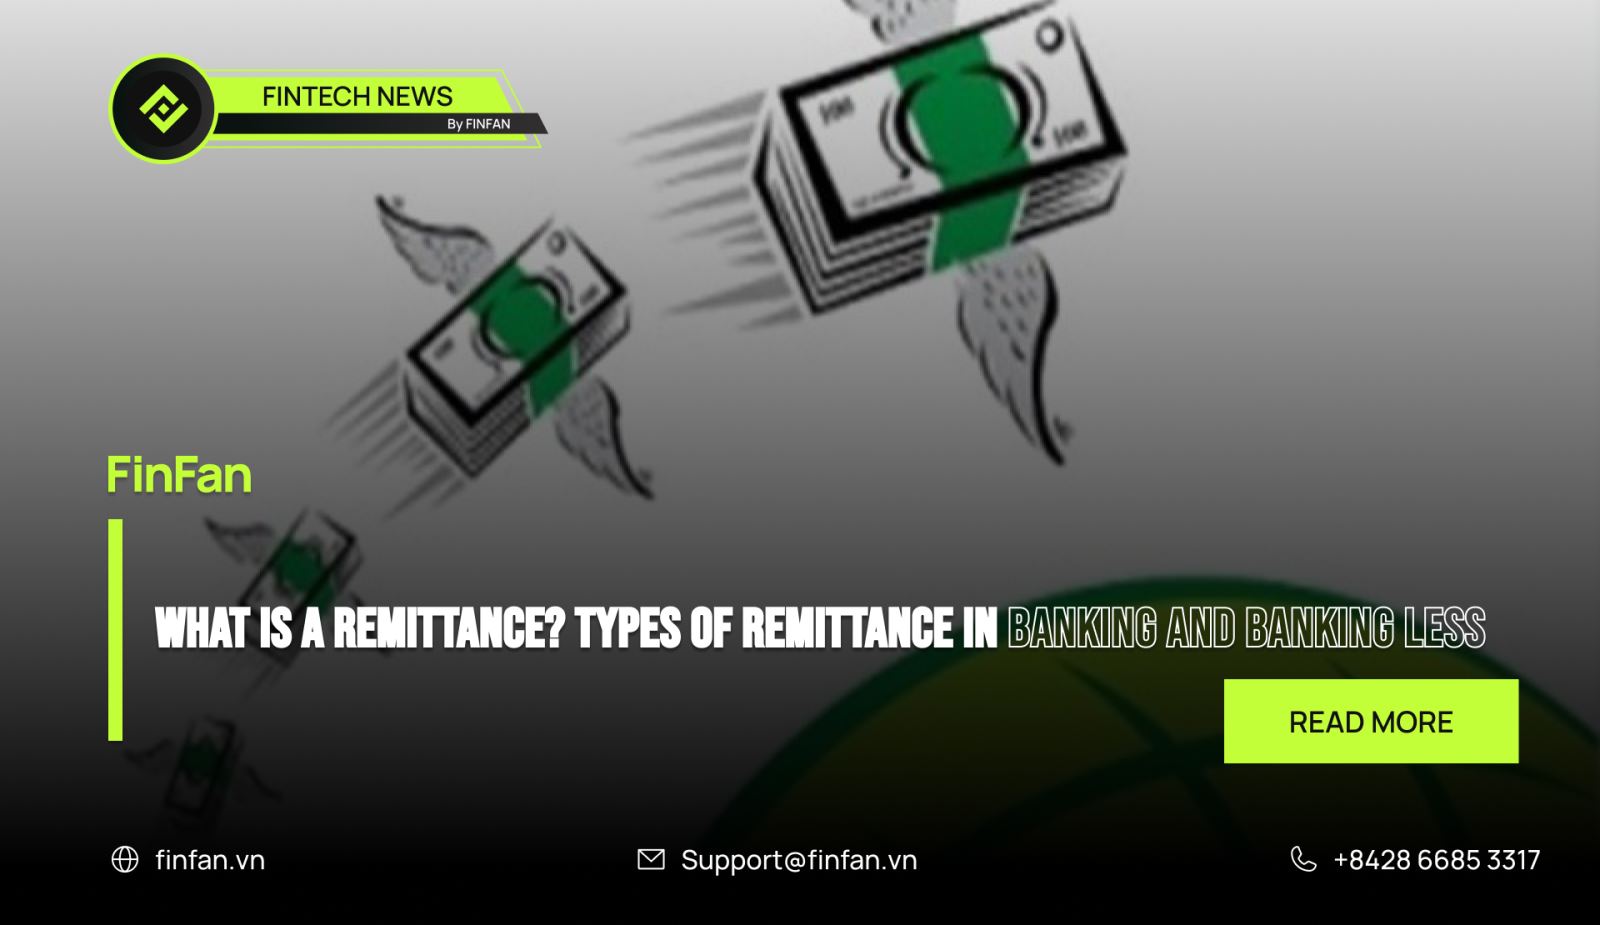 What is a remittance? Types of remittance in banking and banking less